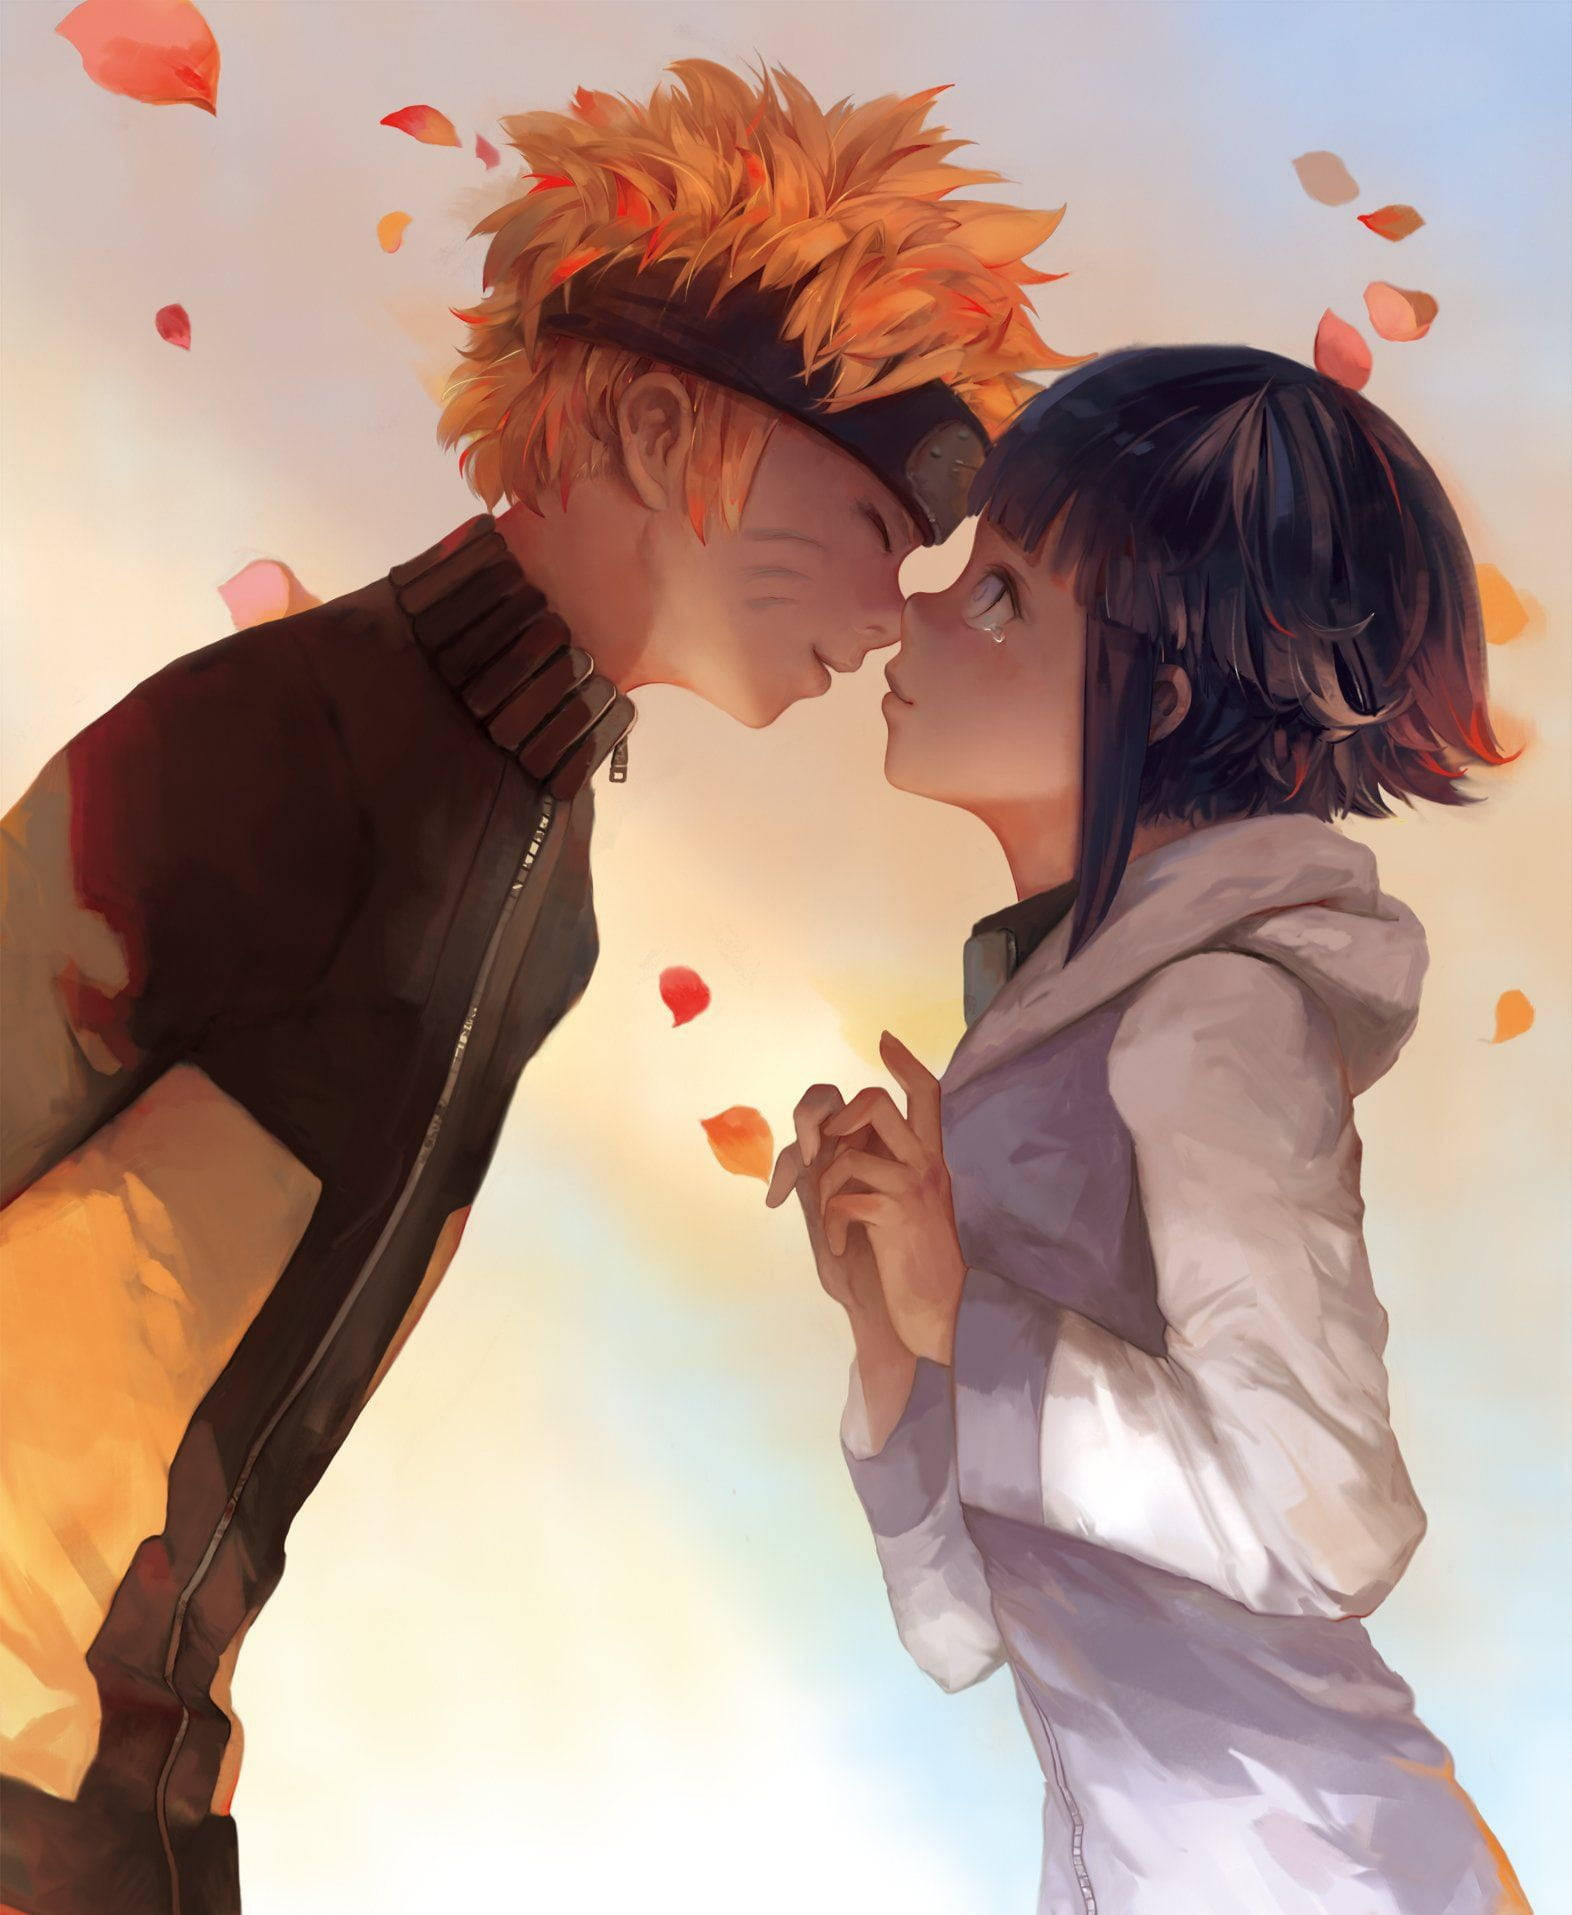 Download Anime Couple Kiss From Naruto Shippuden Wallpaper 